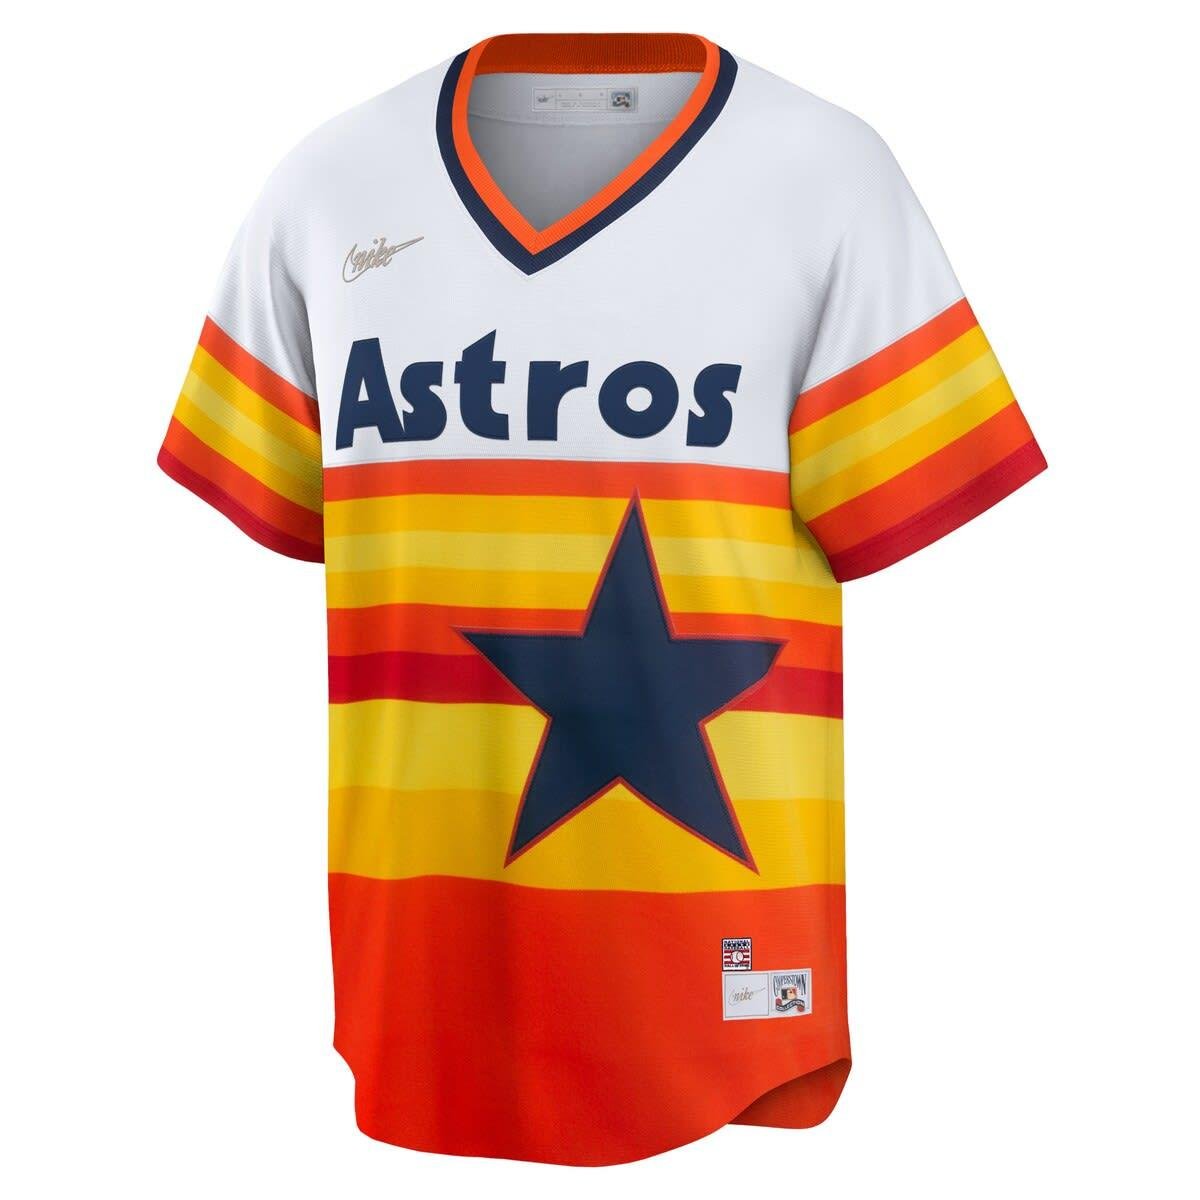 Houston Astros Cooperstown Jersey, Cooperstown Collection